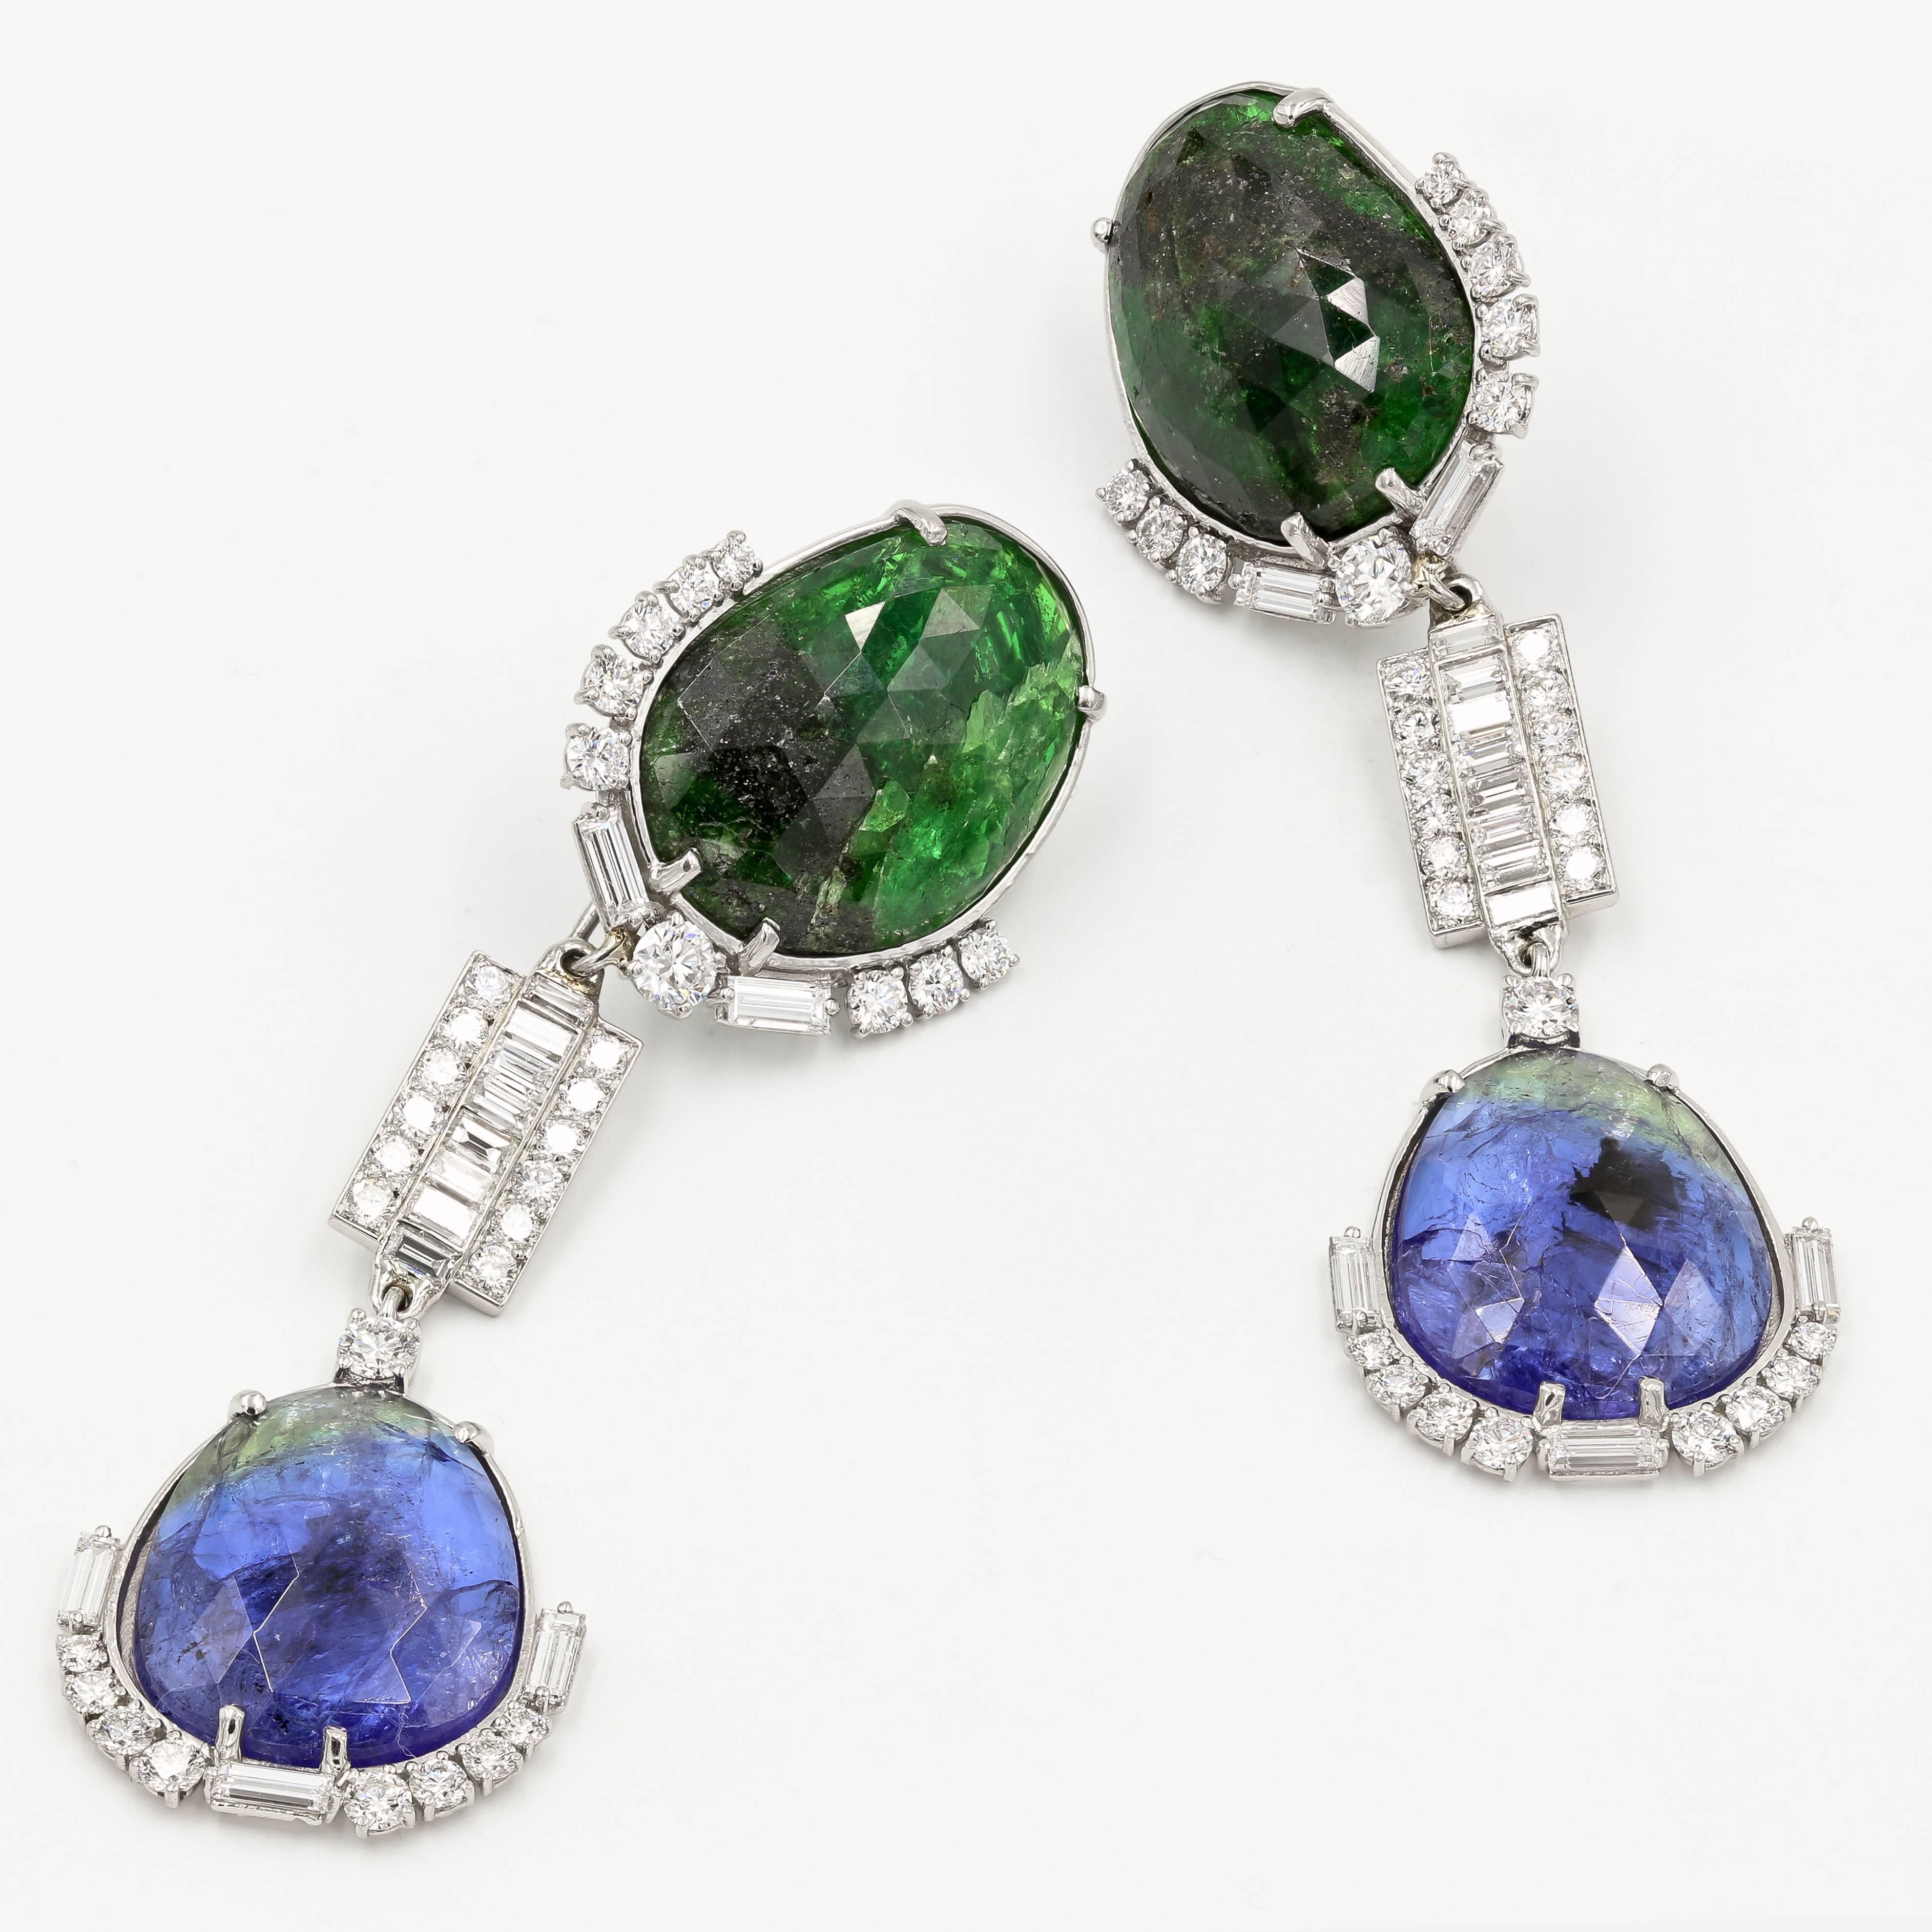 These stunning versatile earrings are truly one-of-a-kind. Set in platinum, they feature 2 tsavorites slices weighing 36.72cts. t.w. at the top and 2 tanzanite slices weighing 26.56cts. t.w. dangling at the bottom. These stones are accented by 36